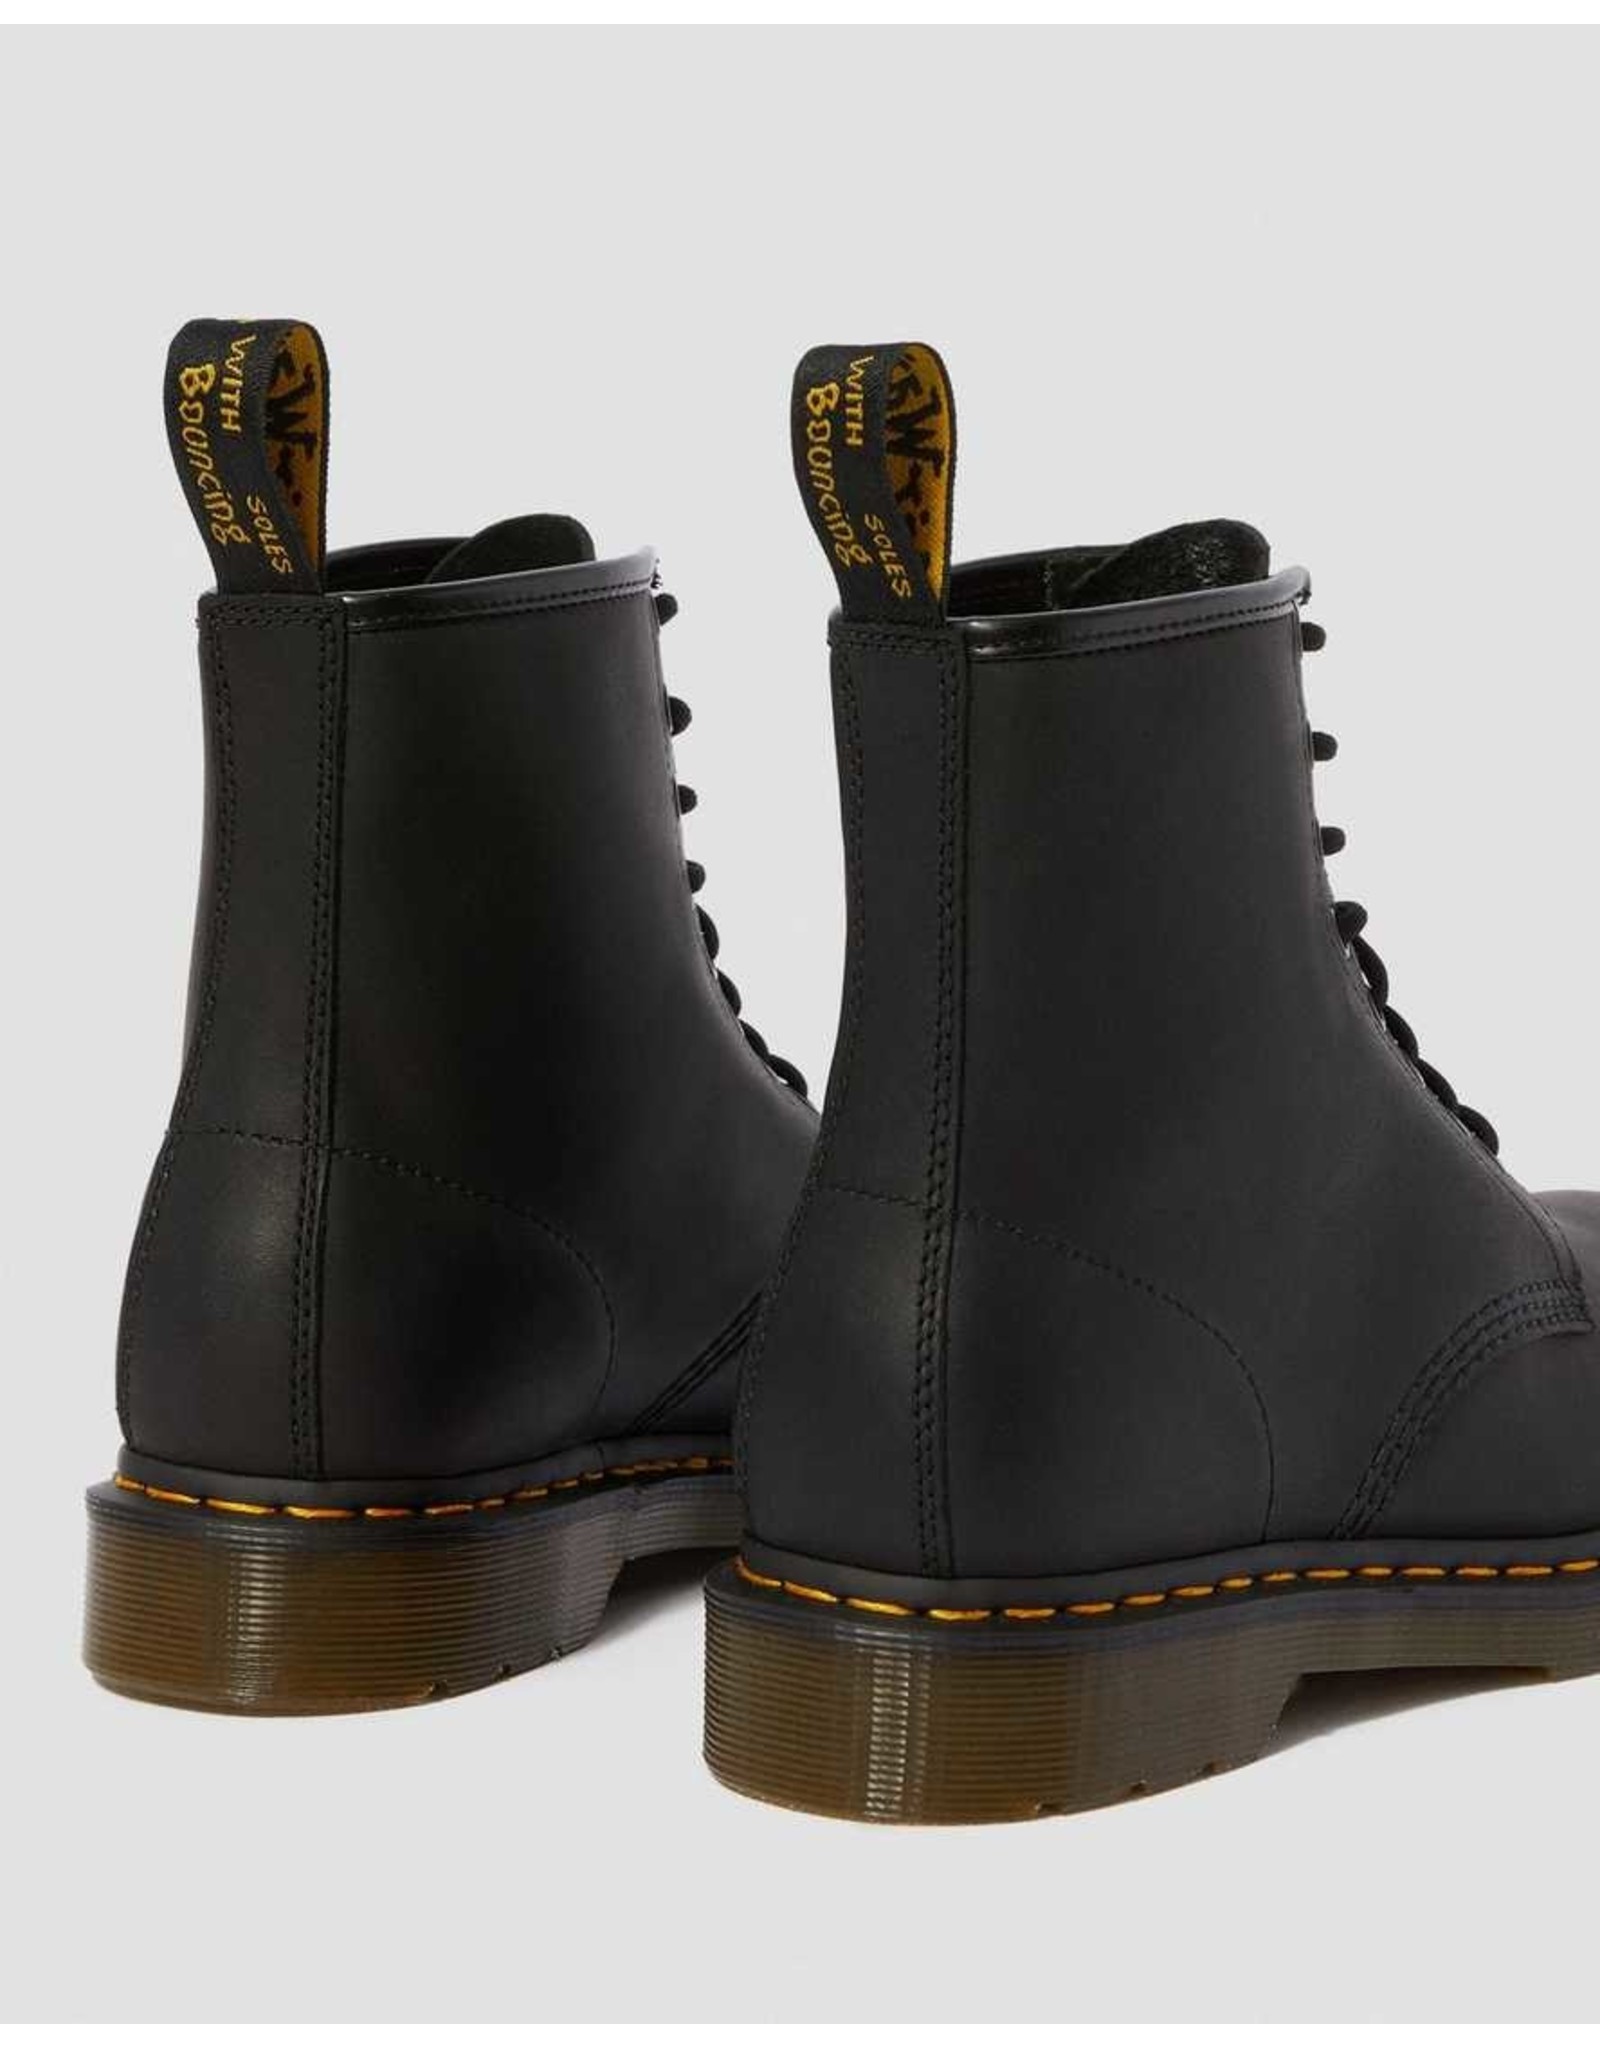 DR. MARTENS DR. MARTENS BLACK GREASY LEATHER LACE UP BOOTS